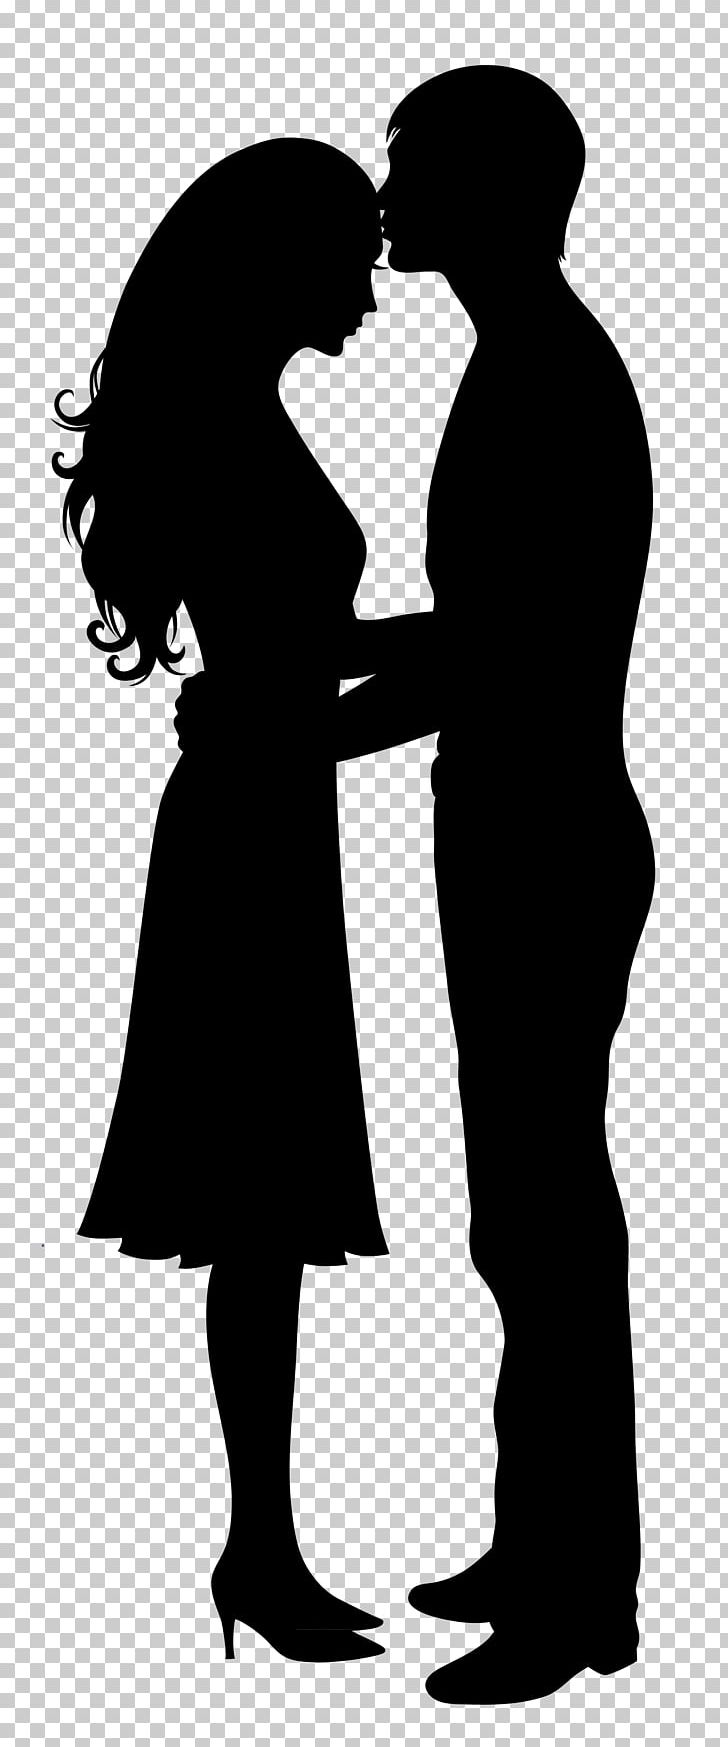 Silhouette Couple PNG, Clipart, Black, Black And White, Cartoon, Cartoon  Couple, Couple Silhouette Free PNG Download